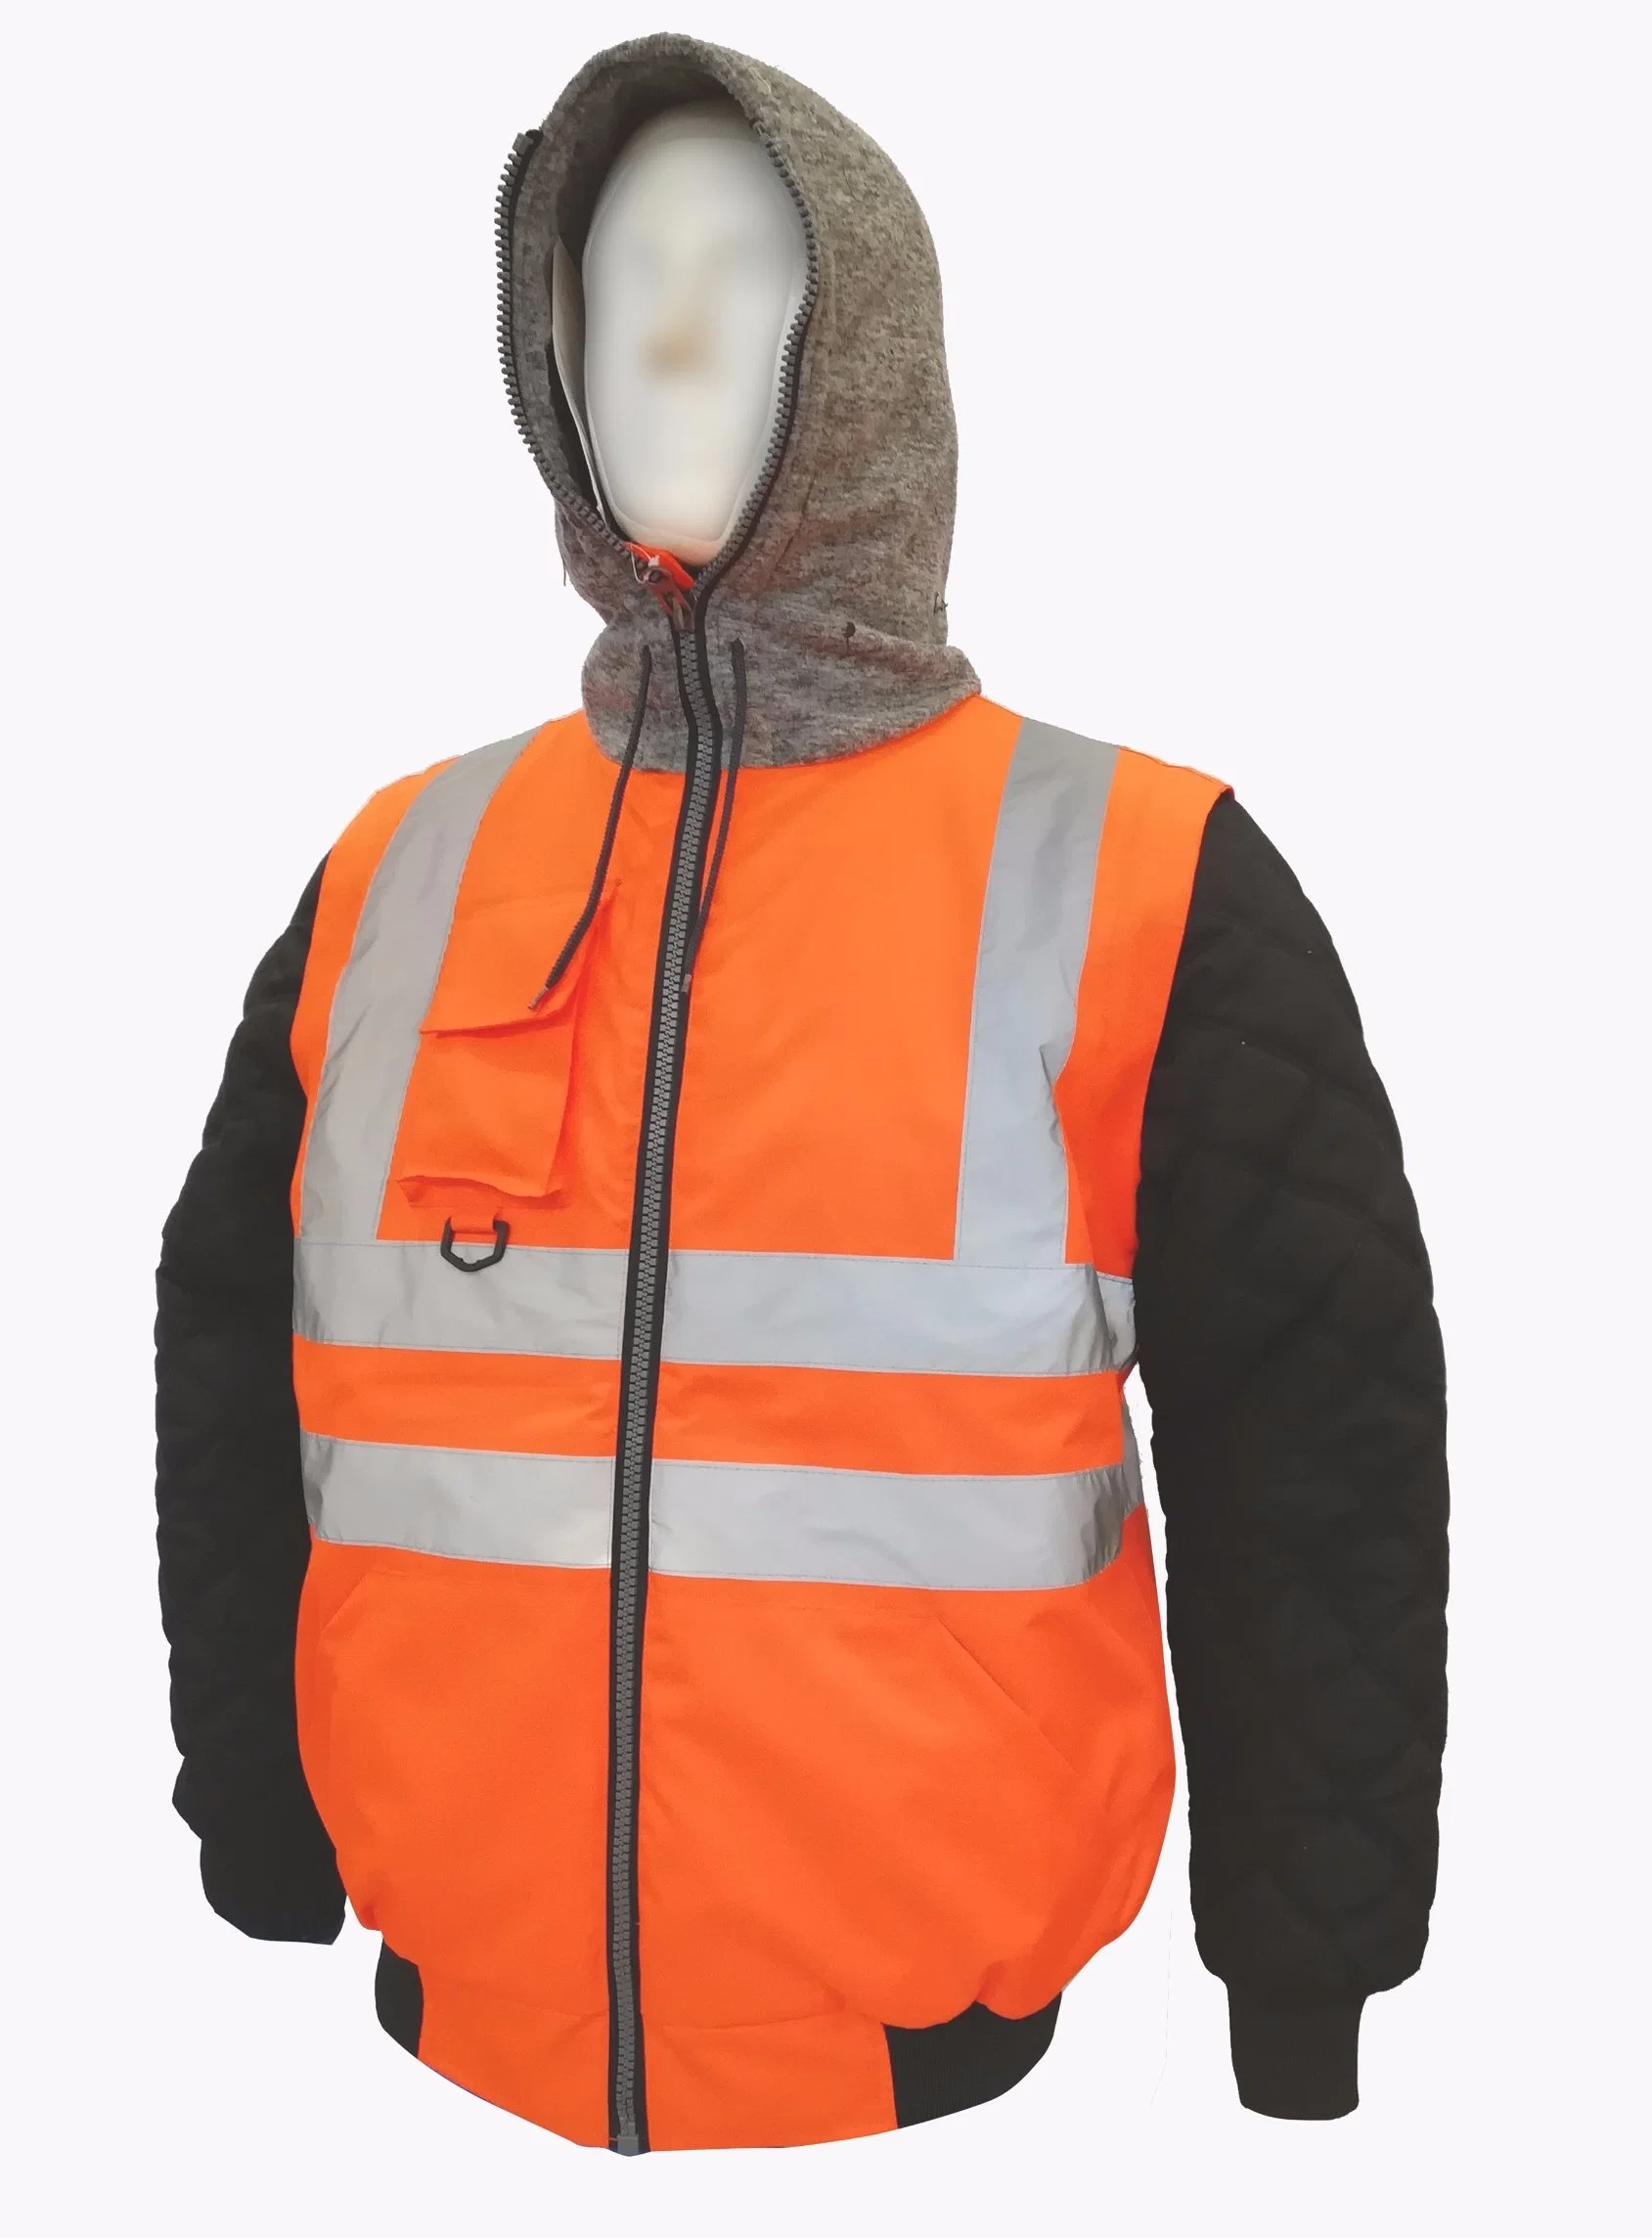 En471 Reflective Hoody Outdoor Safety Protective Clothing for Men